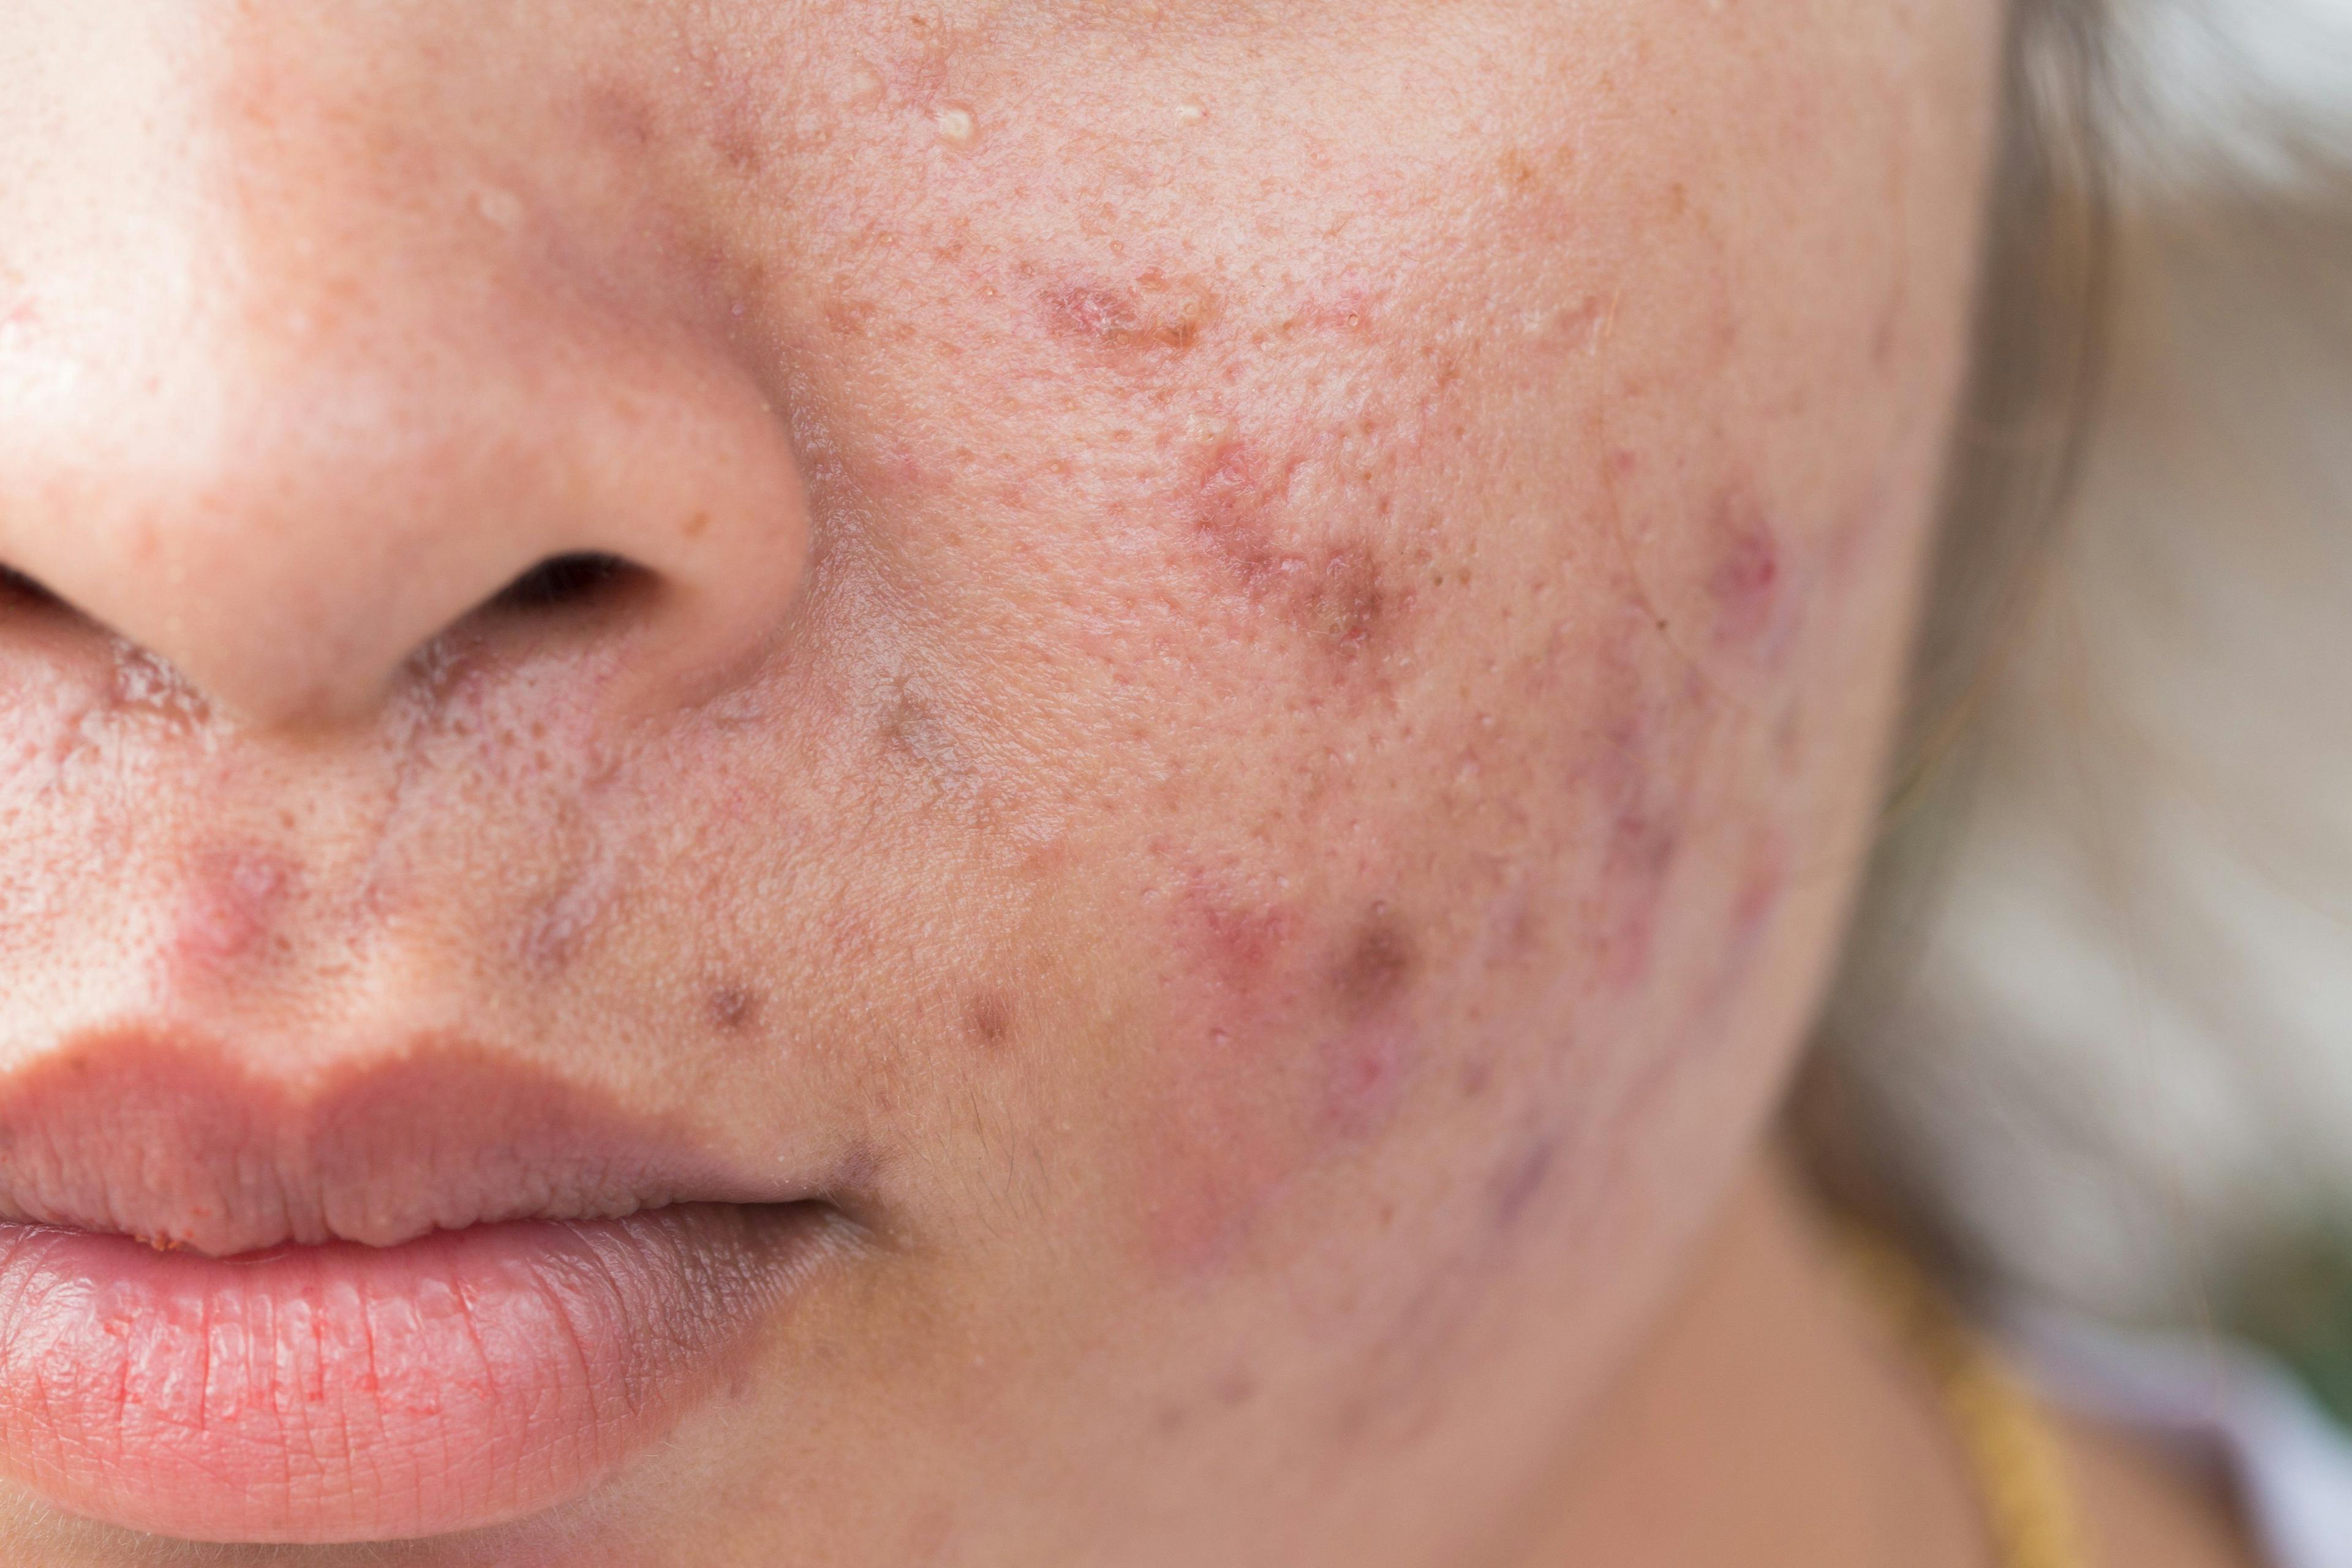 acne lesions on face